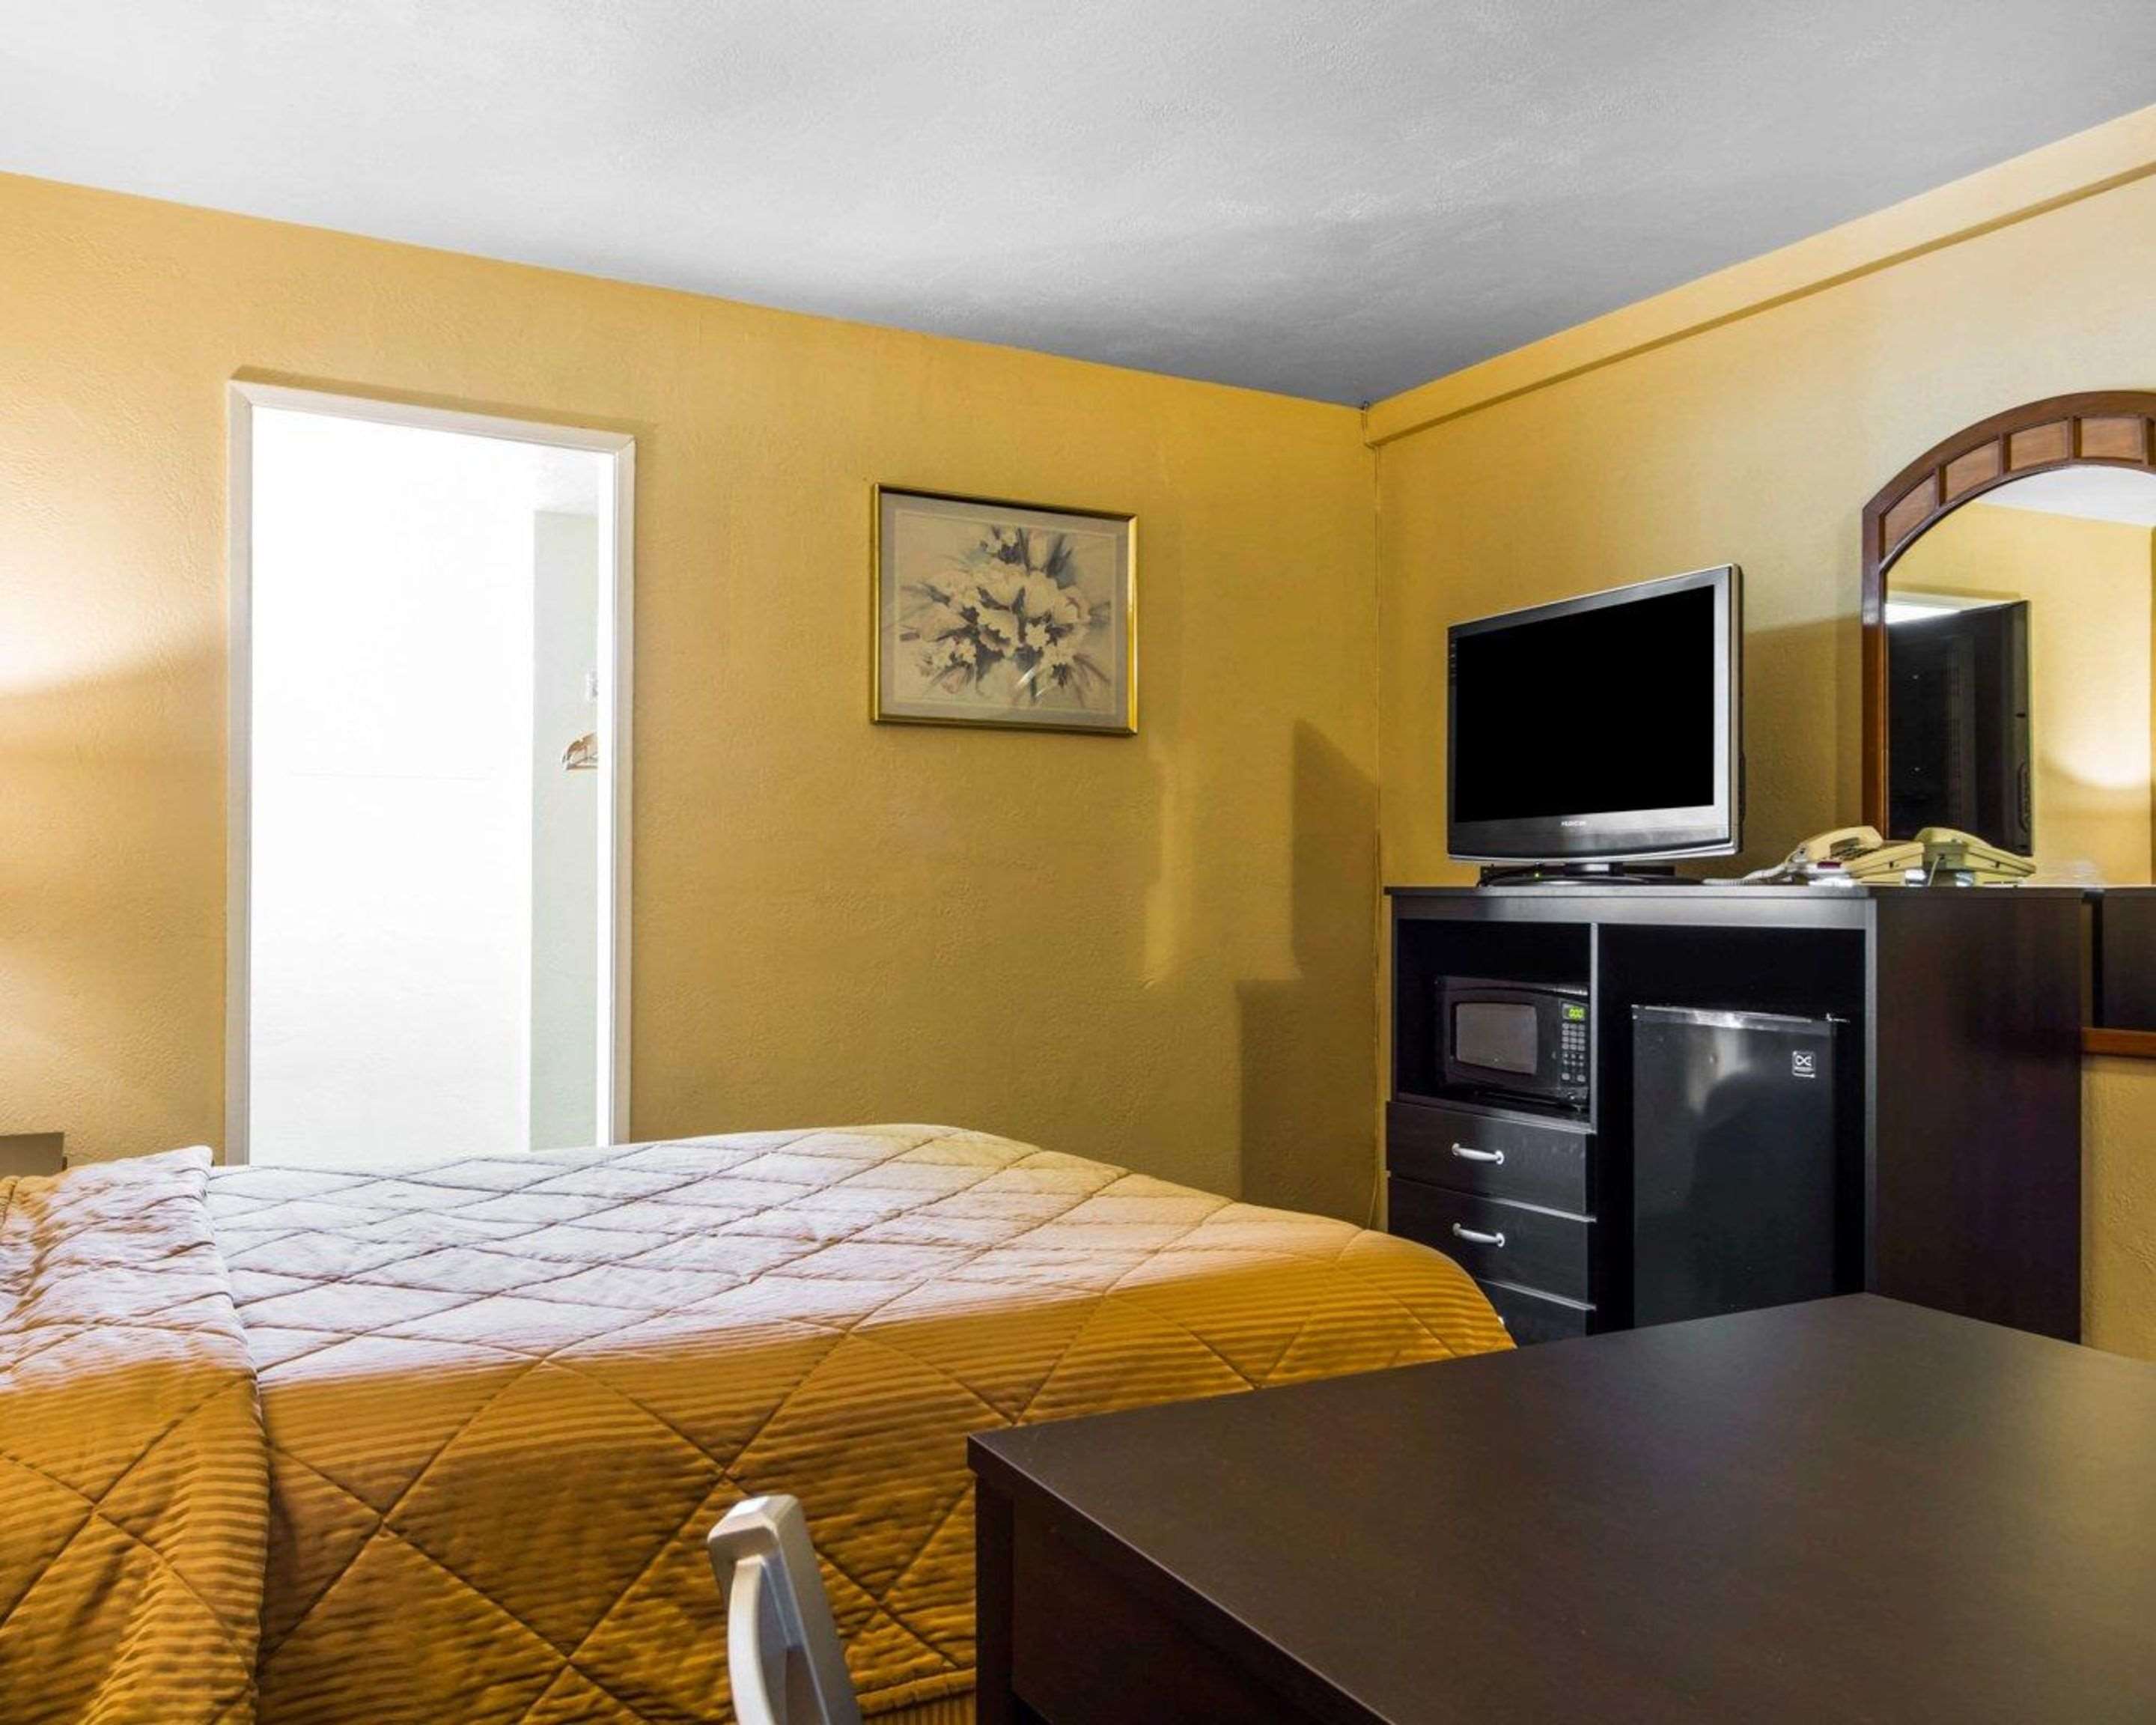 Guest room with added amenities